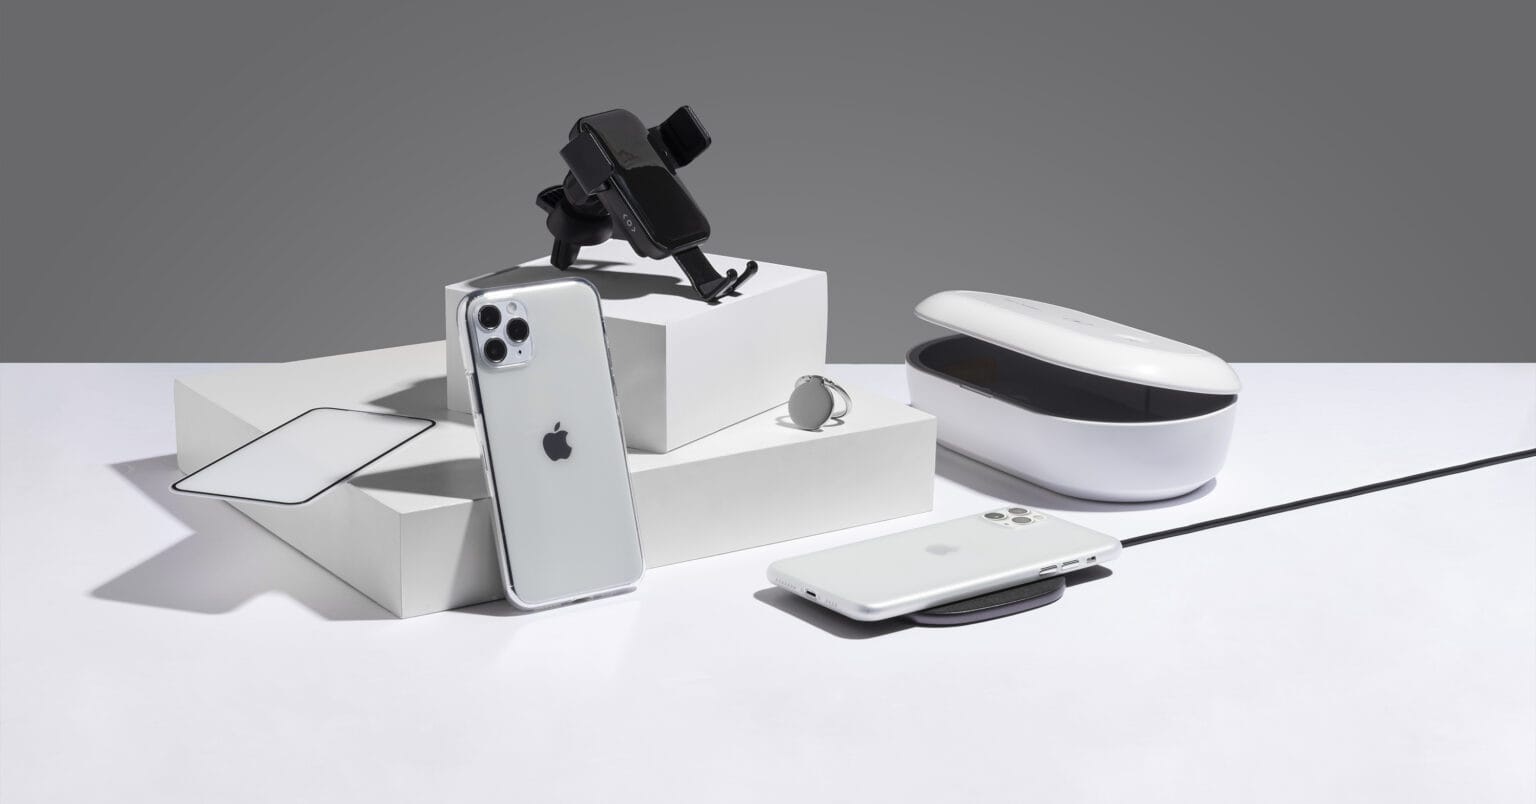 All Totallee iPhone accessories are on sale for Cult of Mac readers.